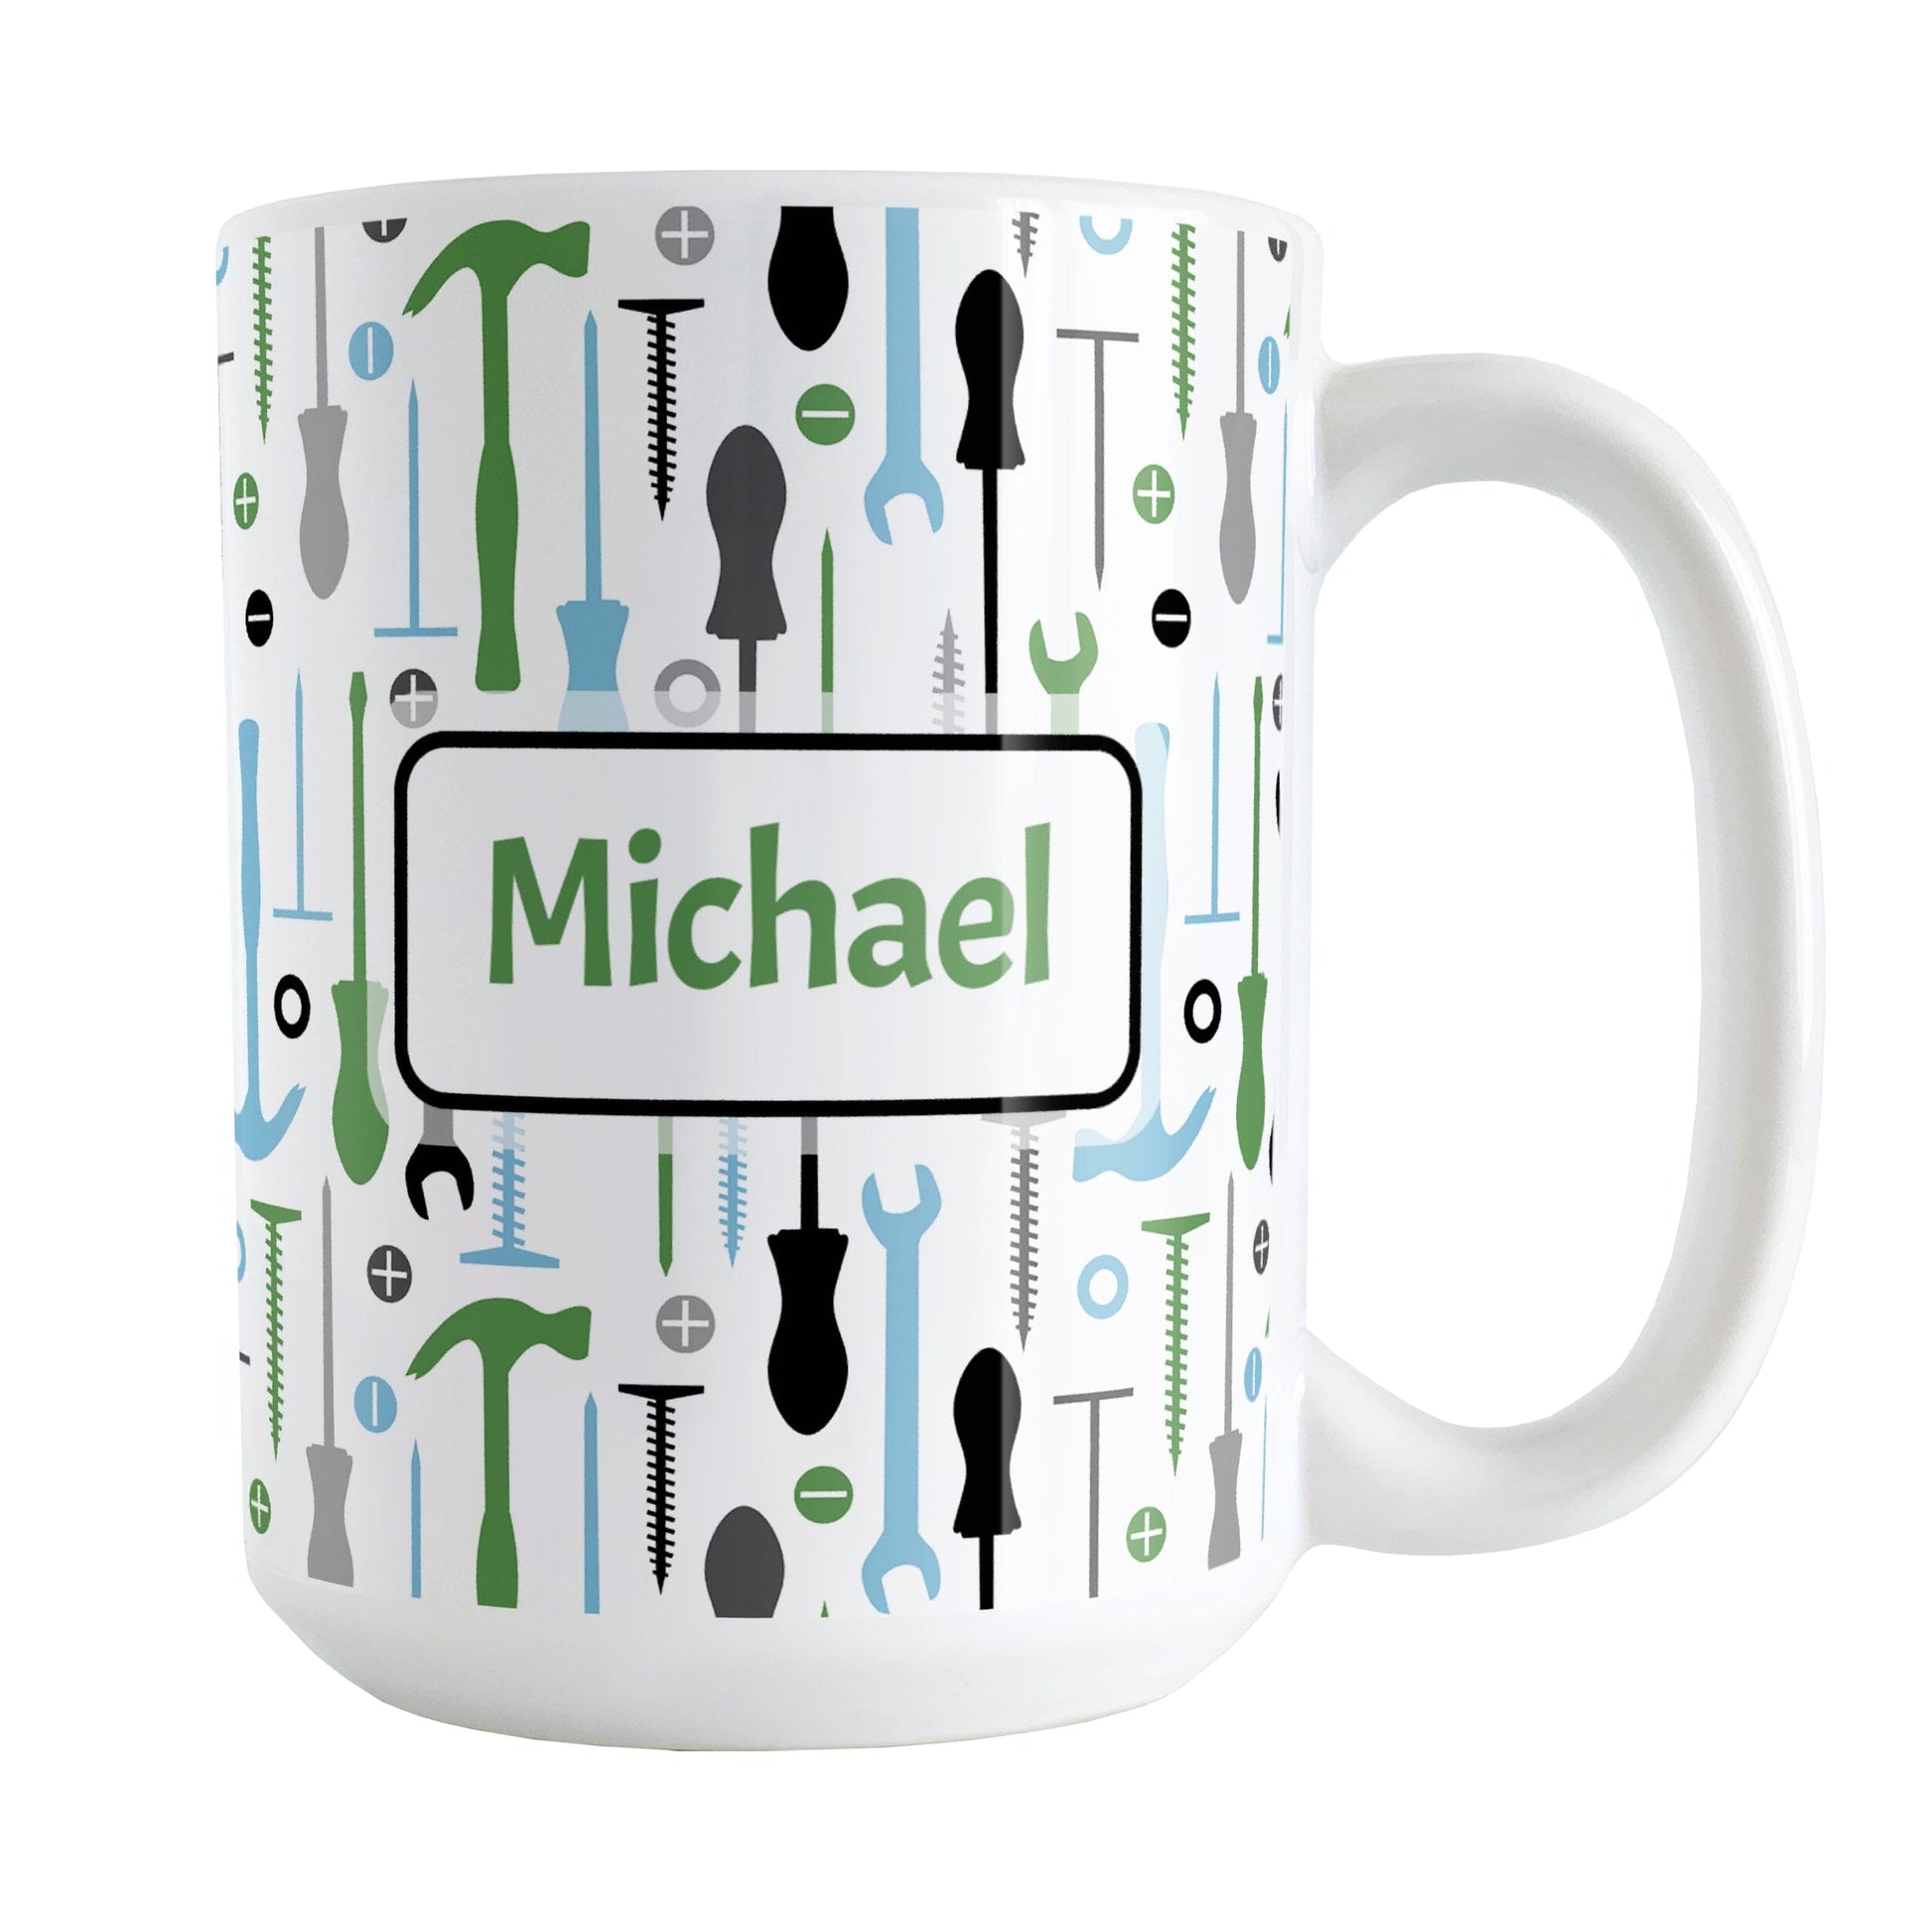 Personalized Green Blue Tools Pattern Mug (15oz) at Amy's Coffee Mugs. A ceramic coffee mug with a modern style pattern of tools in green, blue, black, and gray over white that wraps around the mug to the handle. Perfect for any handyman or contractor.  Your name is printed in a green font on both sides of the mug over the tools pattern. 